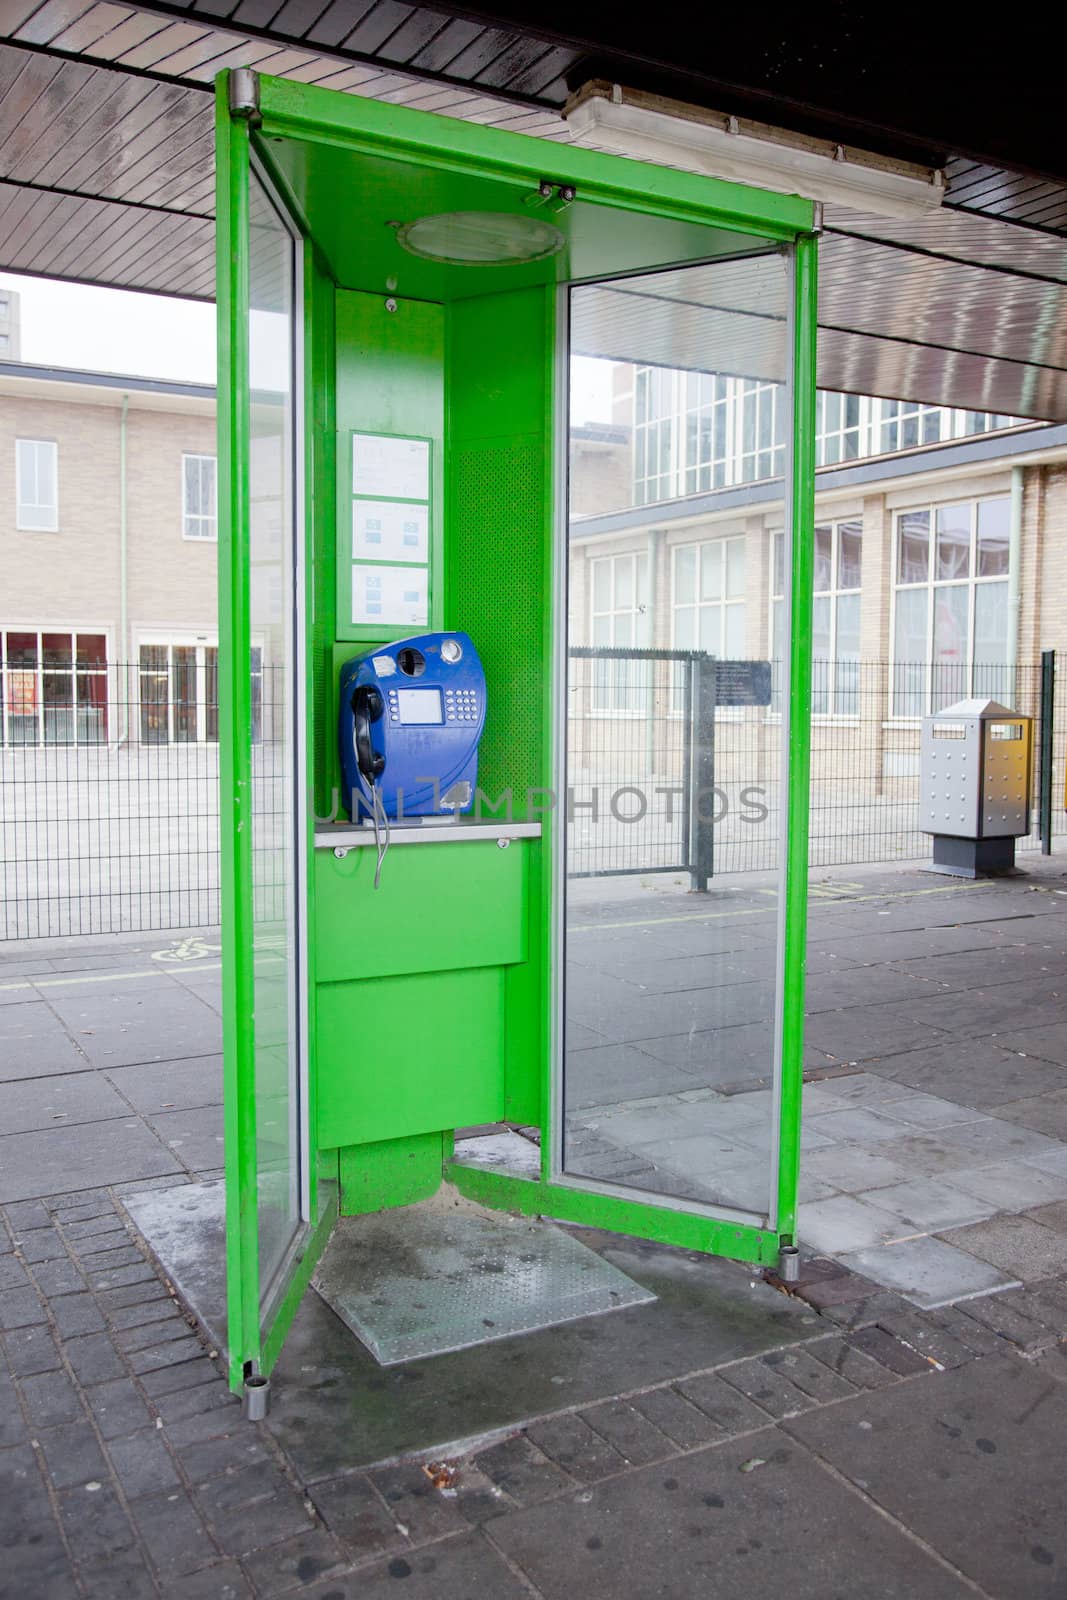 old green pay phone near amstel station in Amsterdam